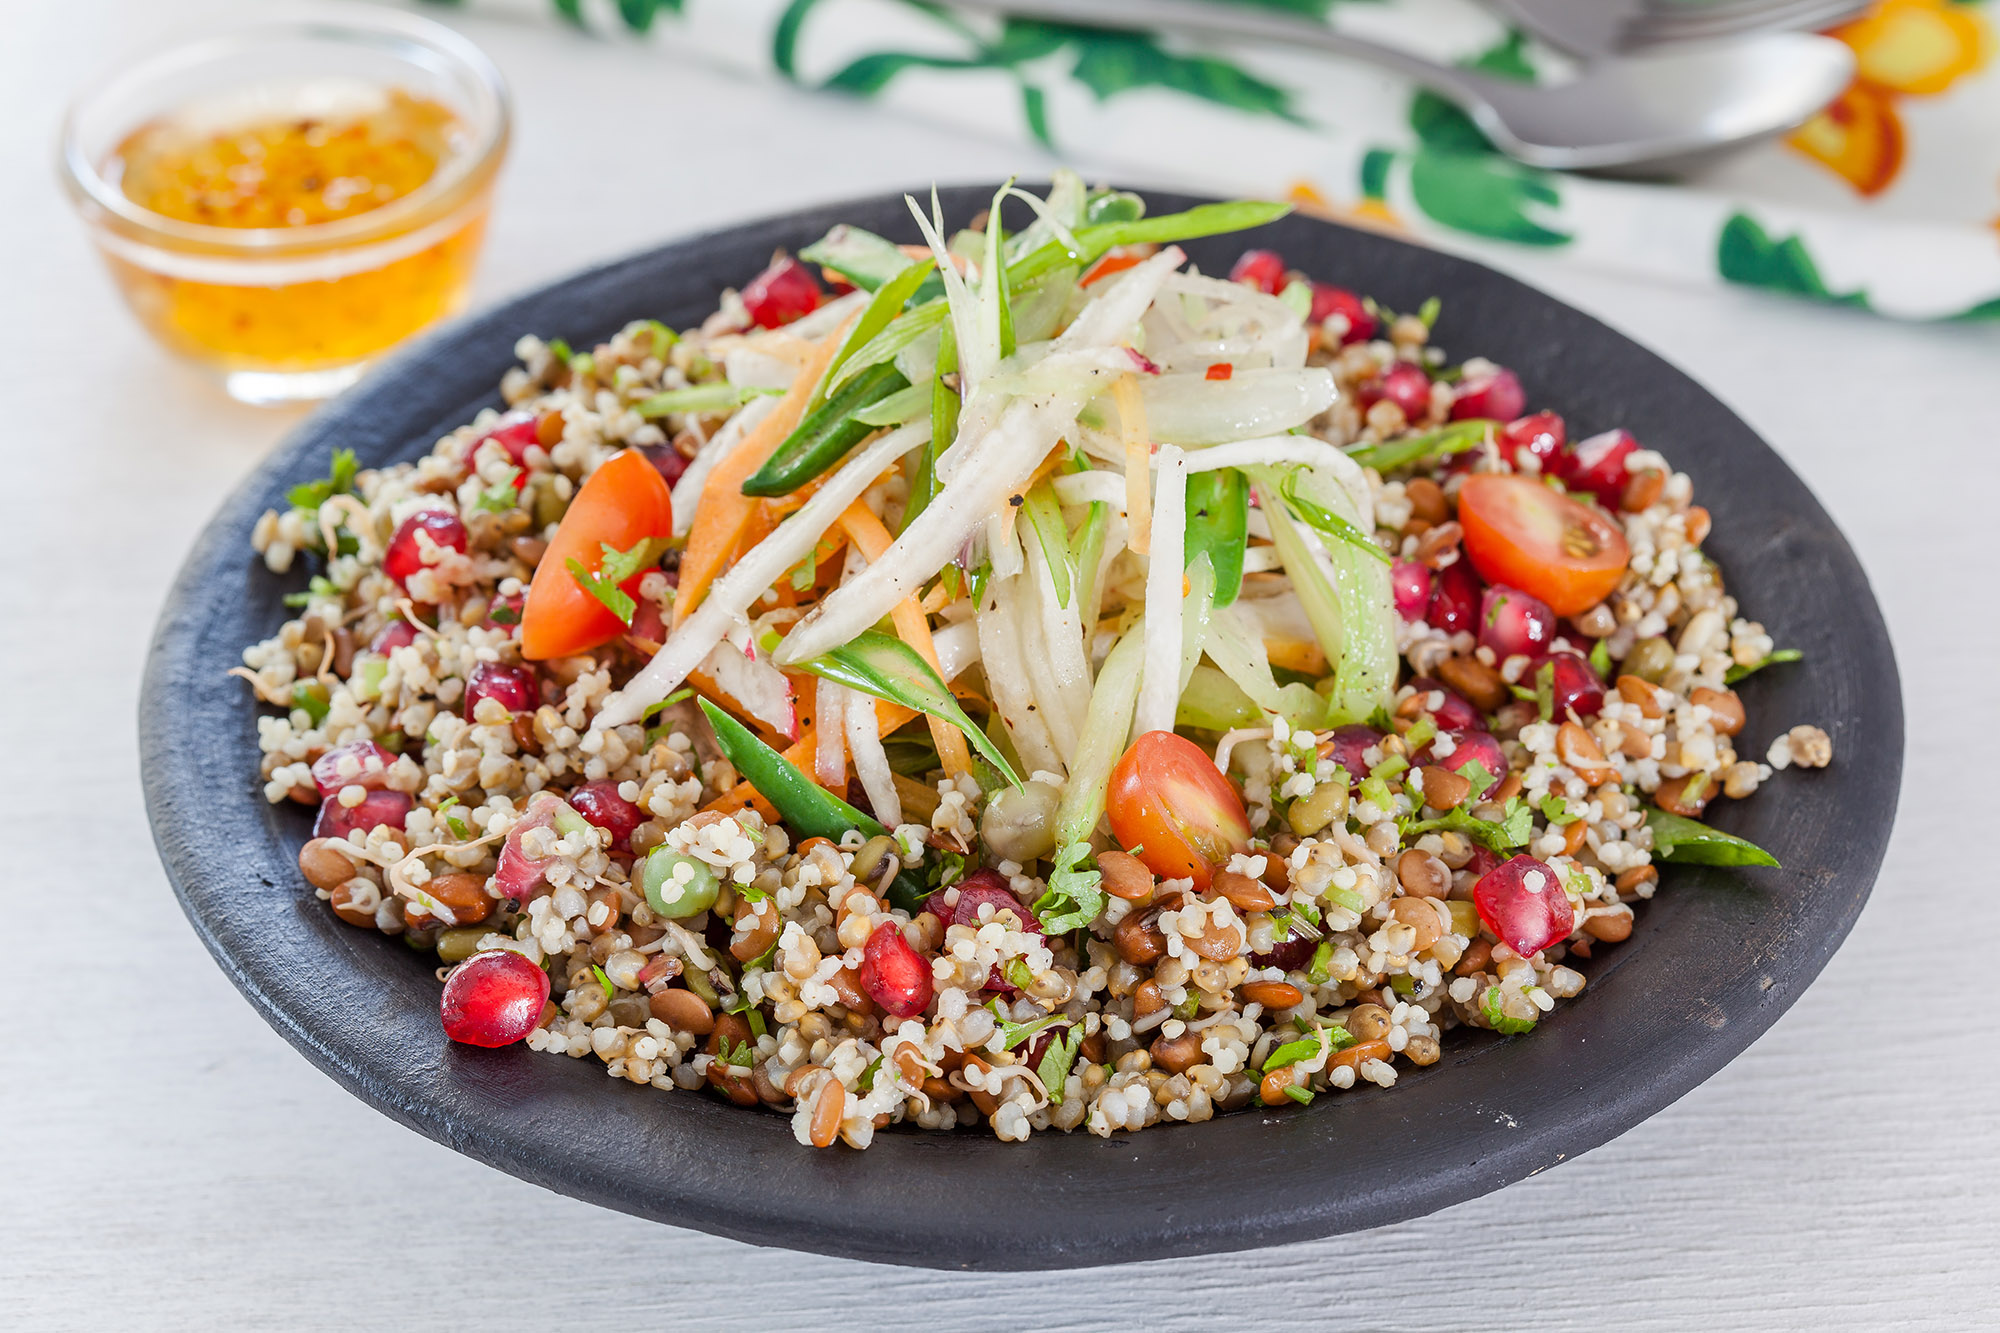 Foxtail Millet Pomegranate Sprouts Salad (Veg) from Fresh Menu